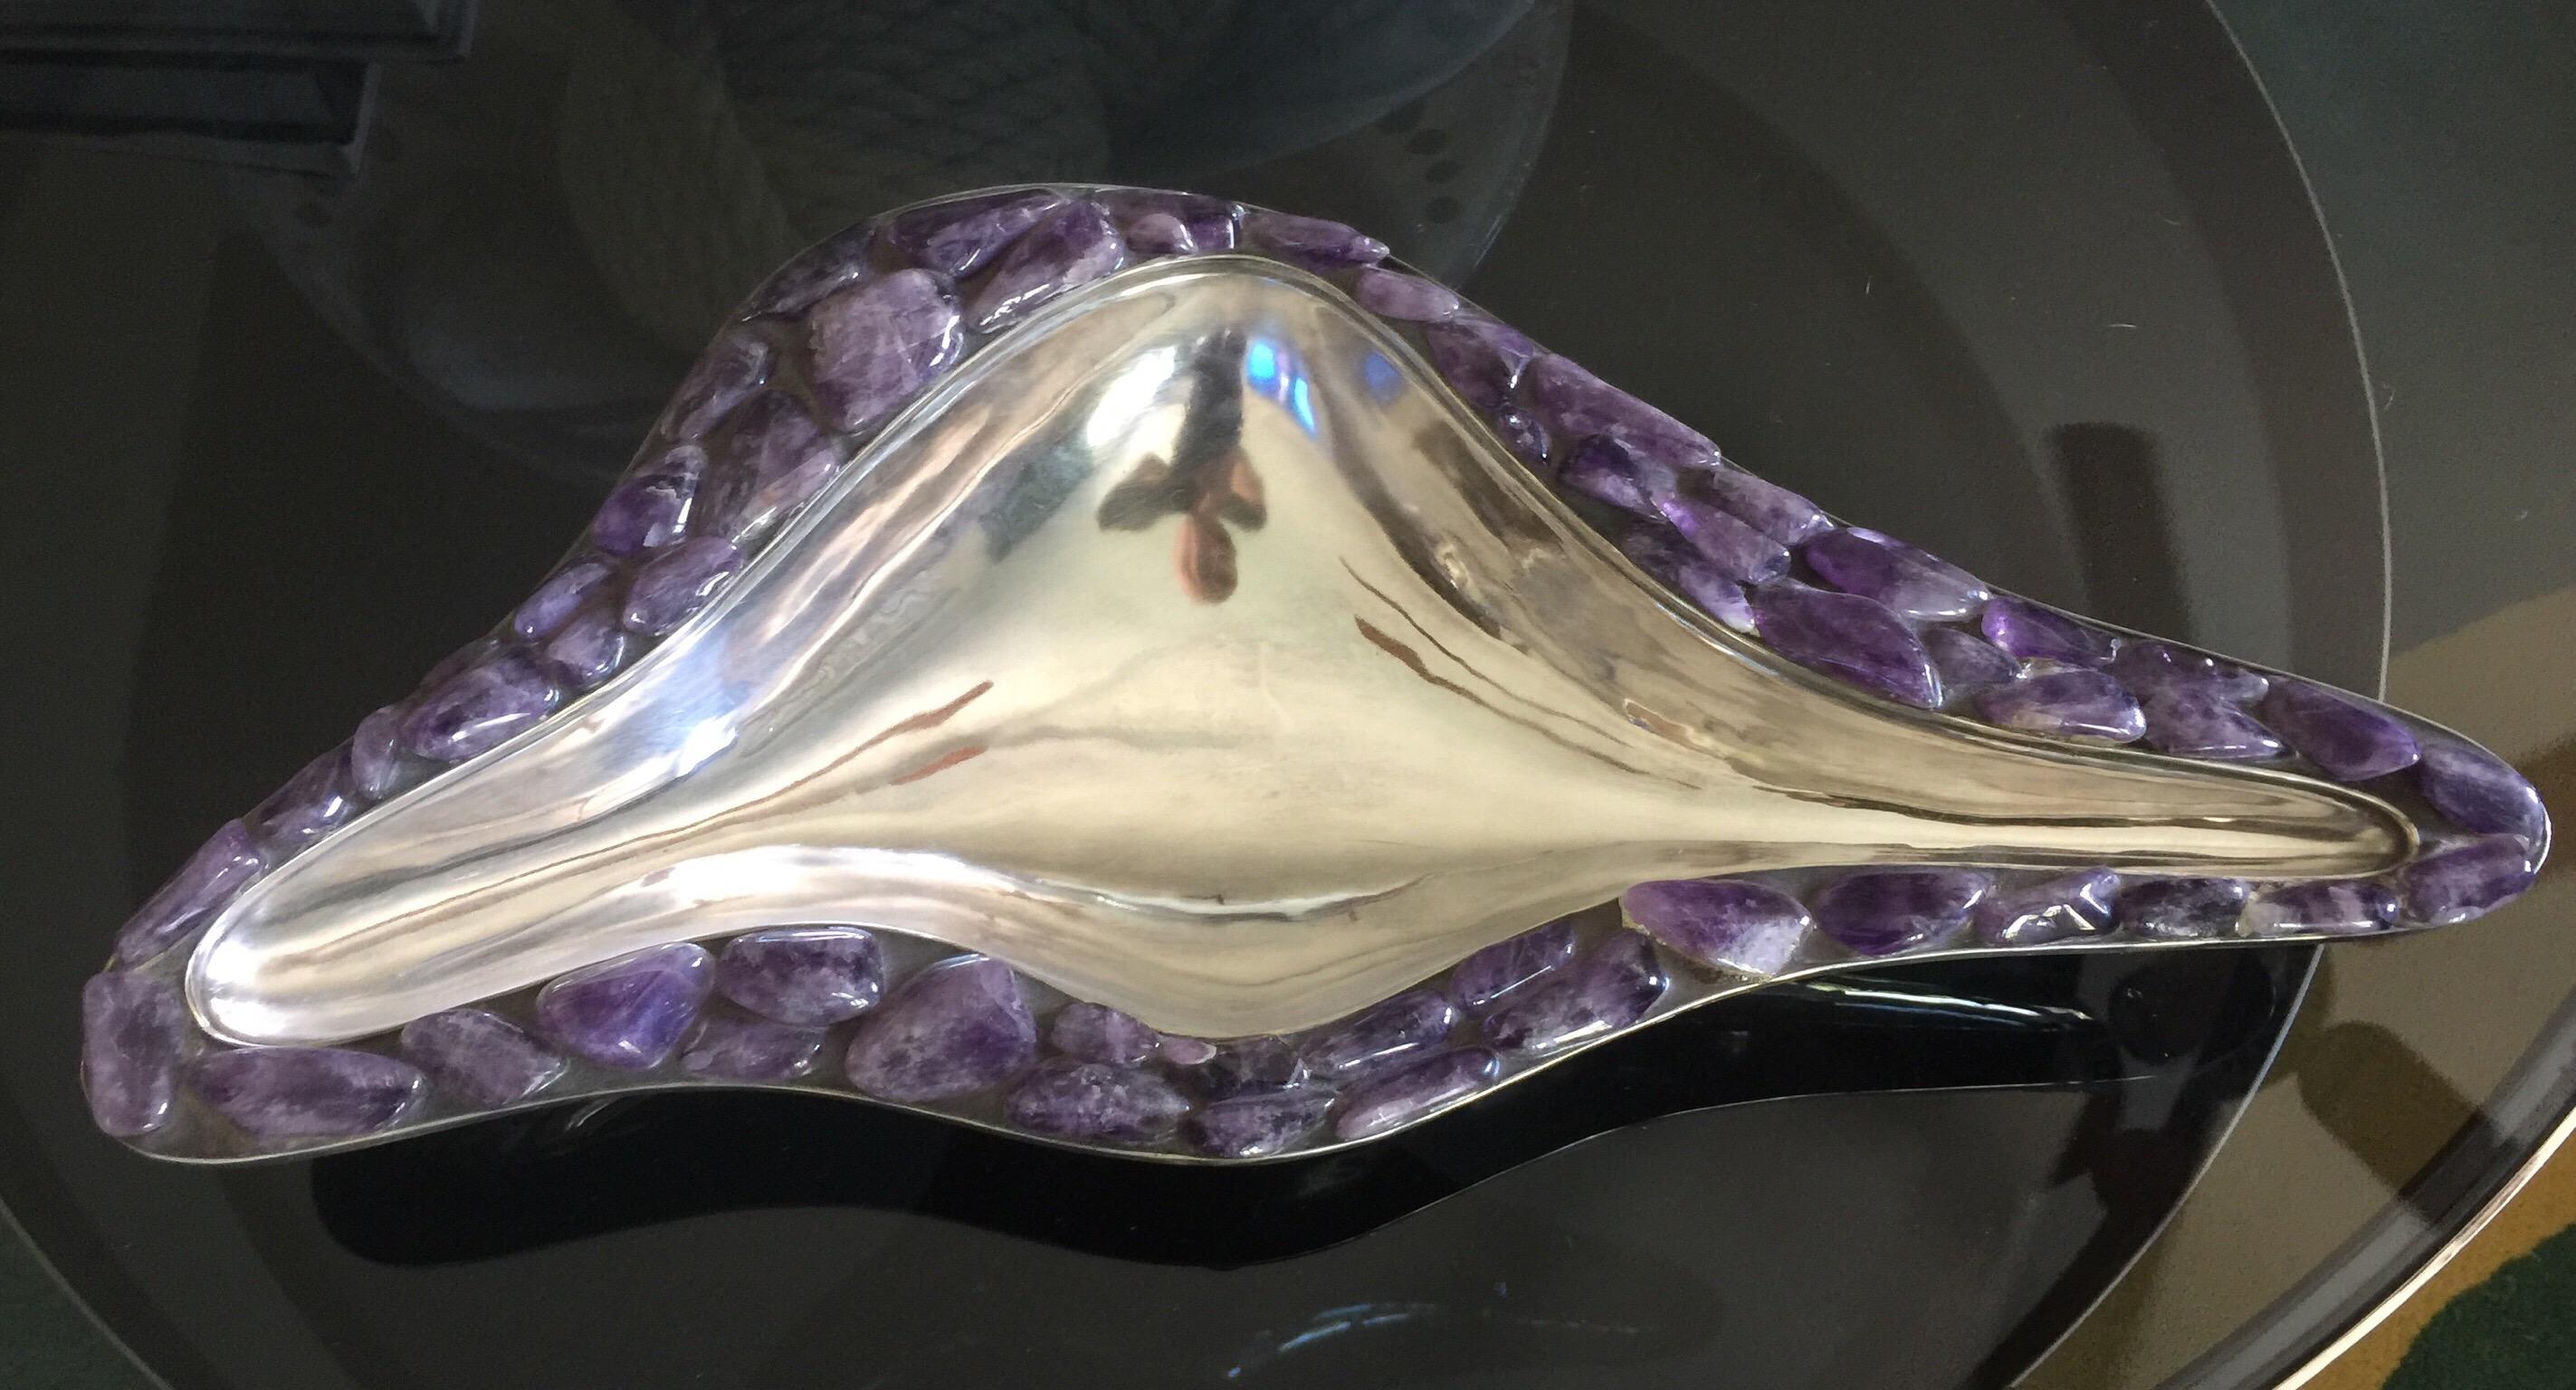 Marked to underside, made in Taxco, Mexico, this hand wrought bowl is covered beautifully with amethyst cabochon semi-precious stones and silver-plate.